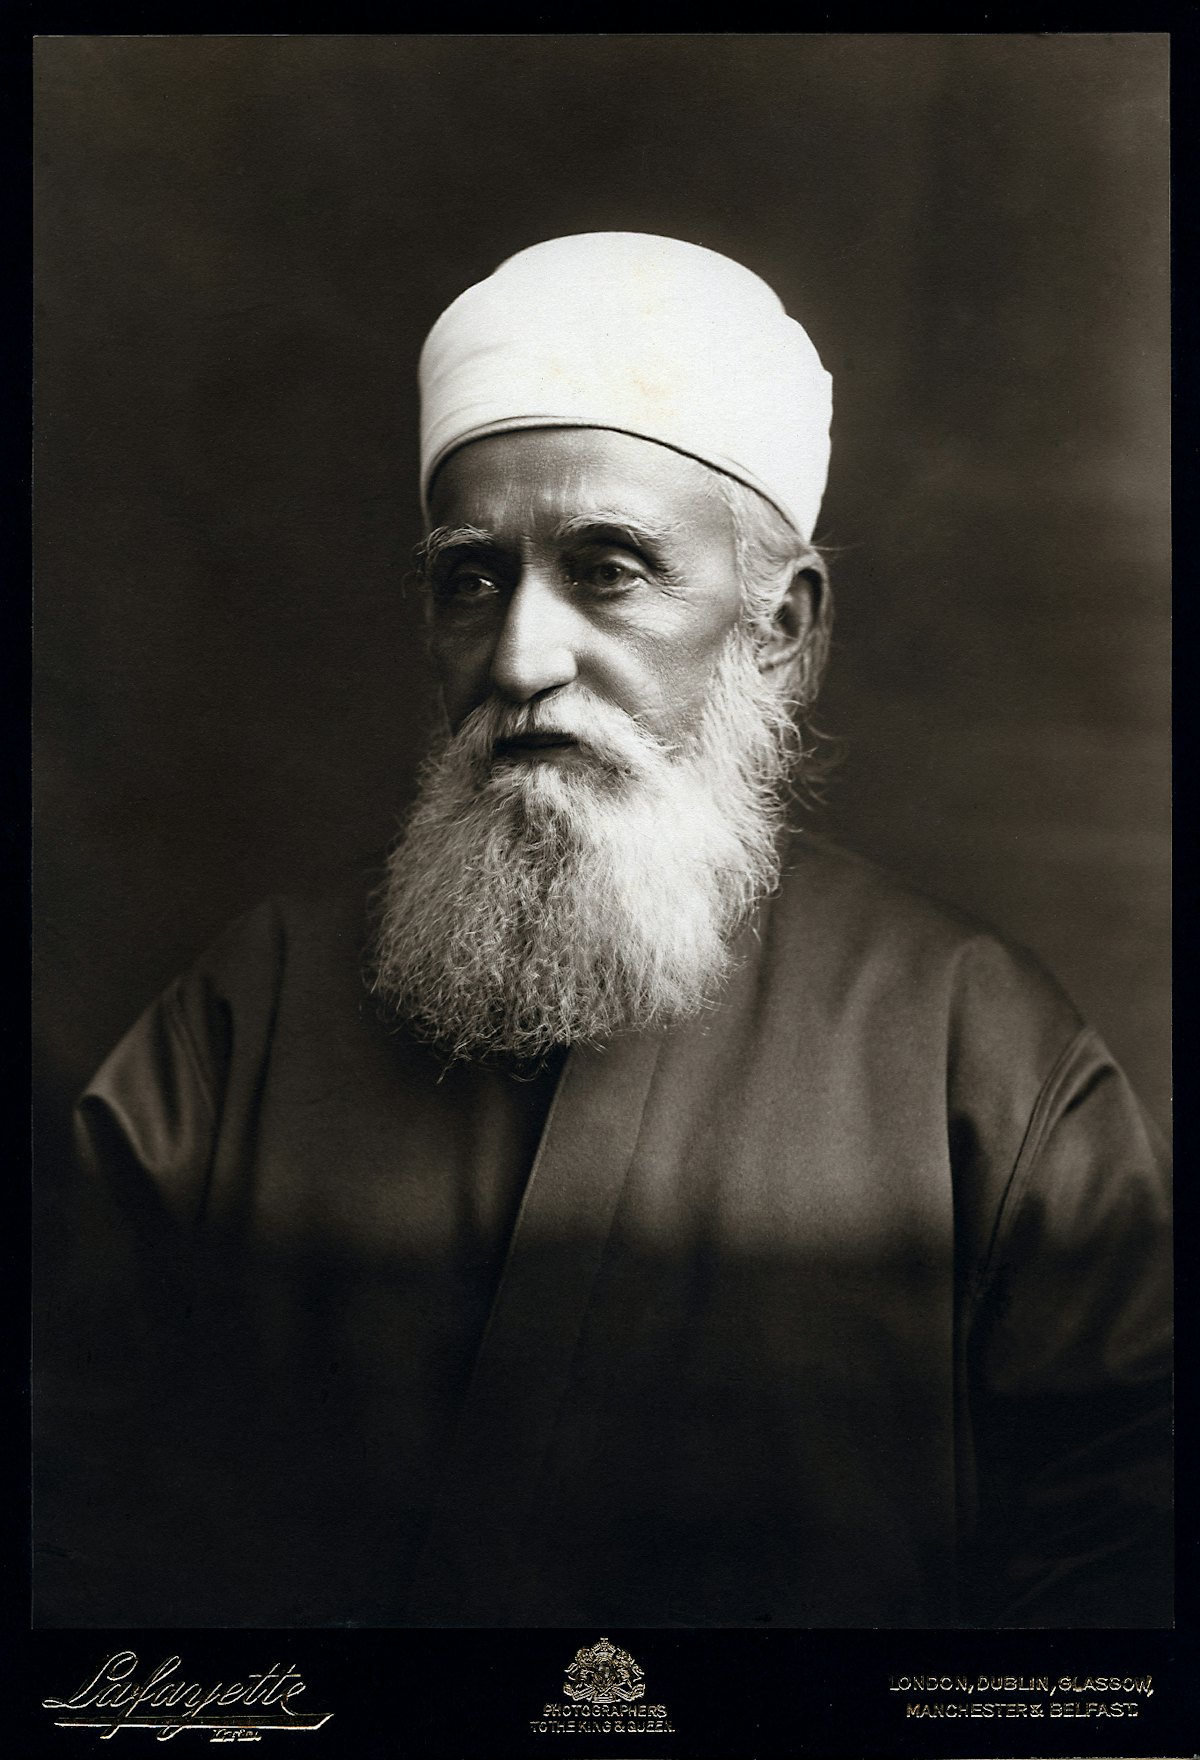 'Abdu'l-Baha, photographed during His visit to London by the famous Lafayette studio. He spent four weeks in the city in September 1911, and later returned from December 1912 to January 1913.